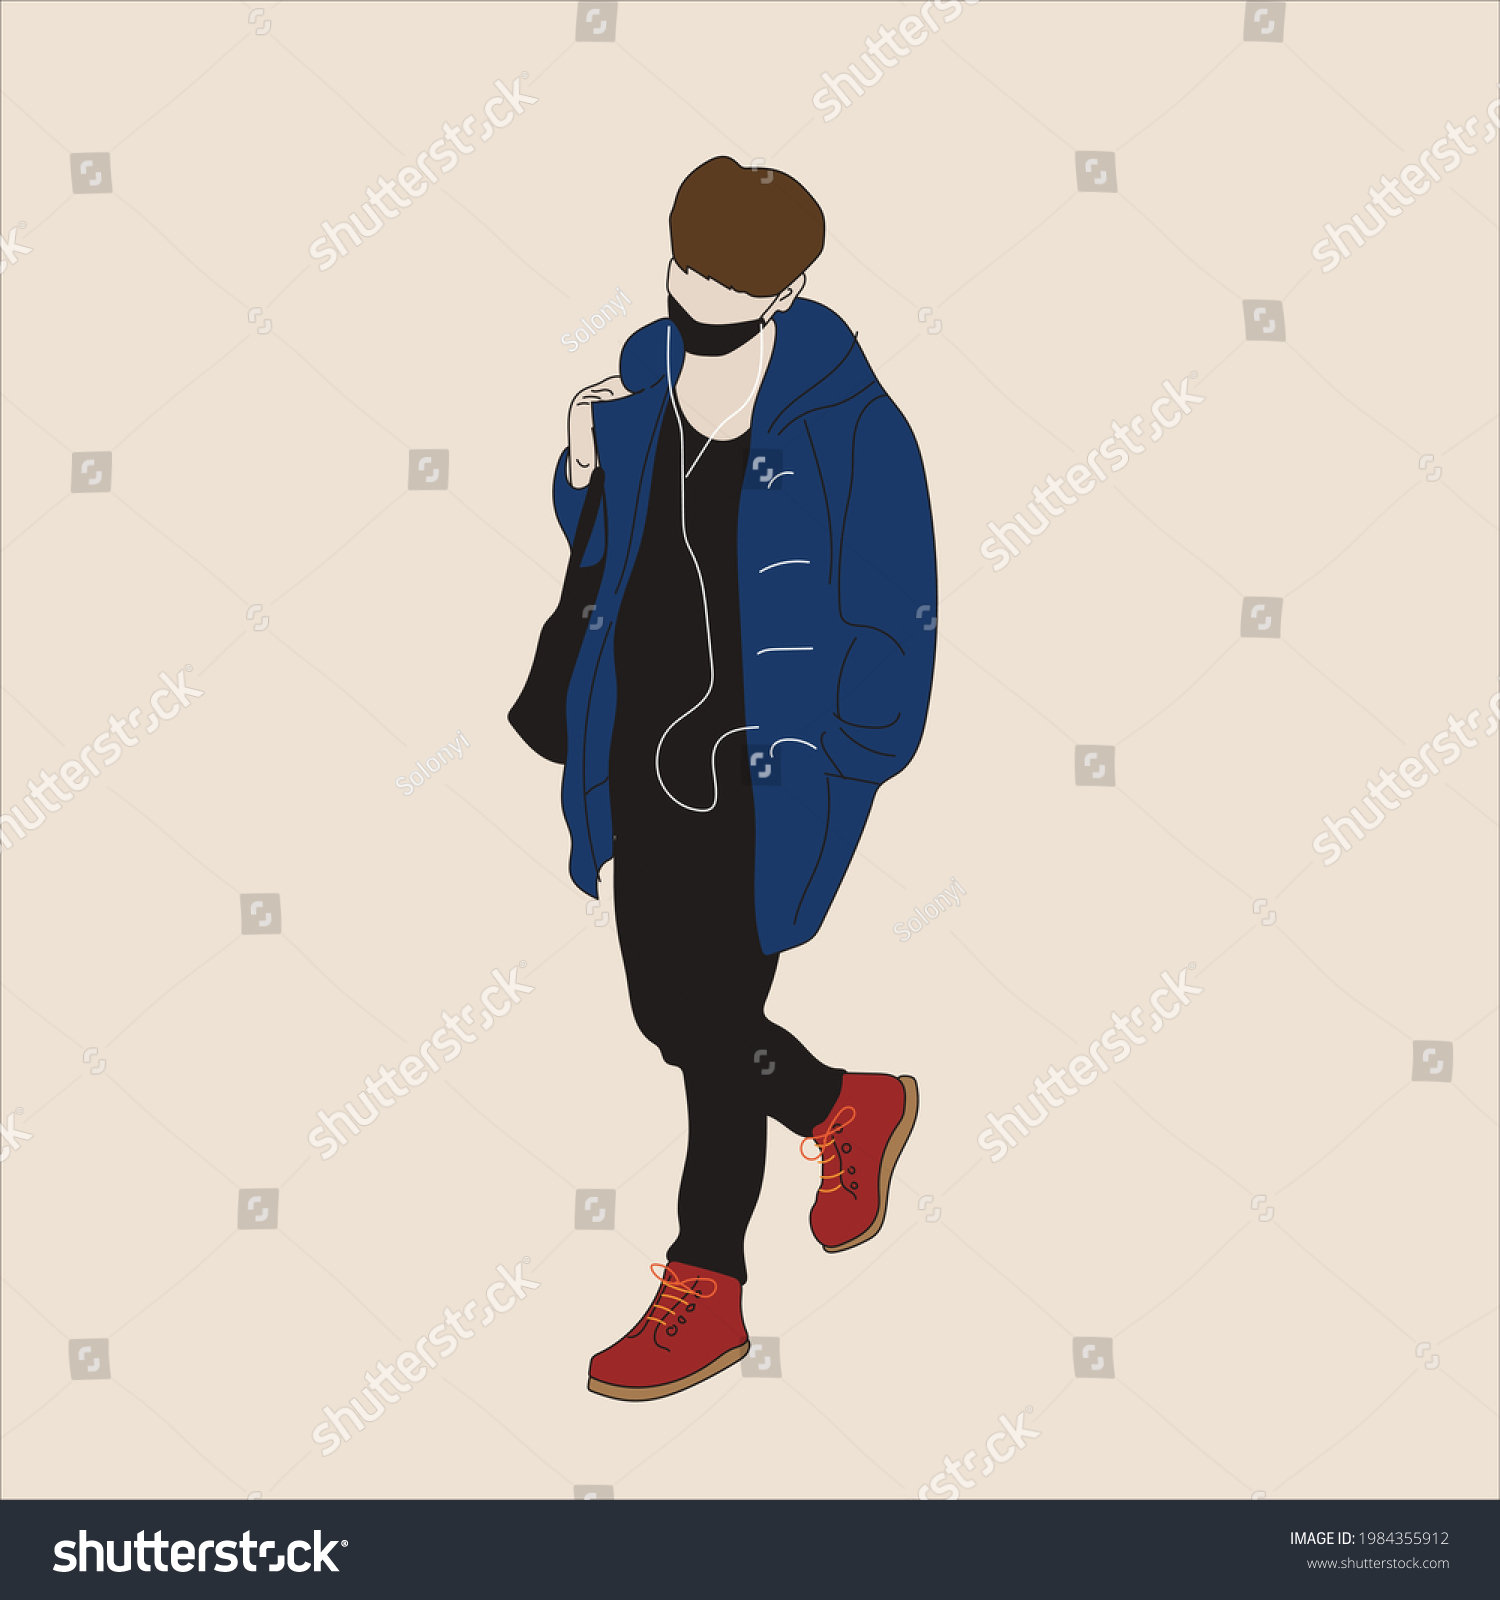 SVG of Vector illustration of Kpop street fashion. Street idols of Koreans. Kpop men's fashion idol. A guy in a blue jacket and black jeans and a black mask. svg